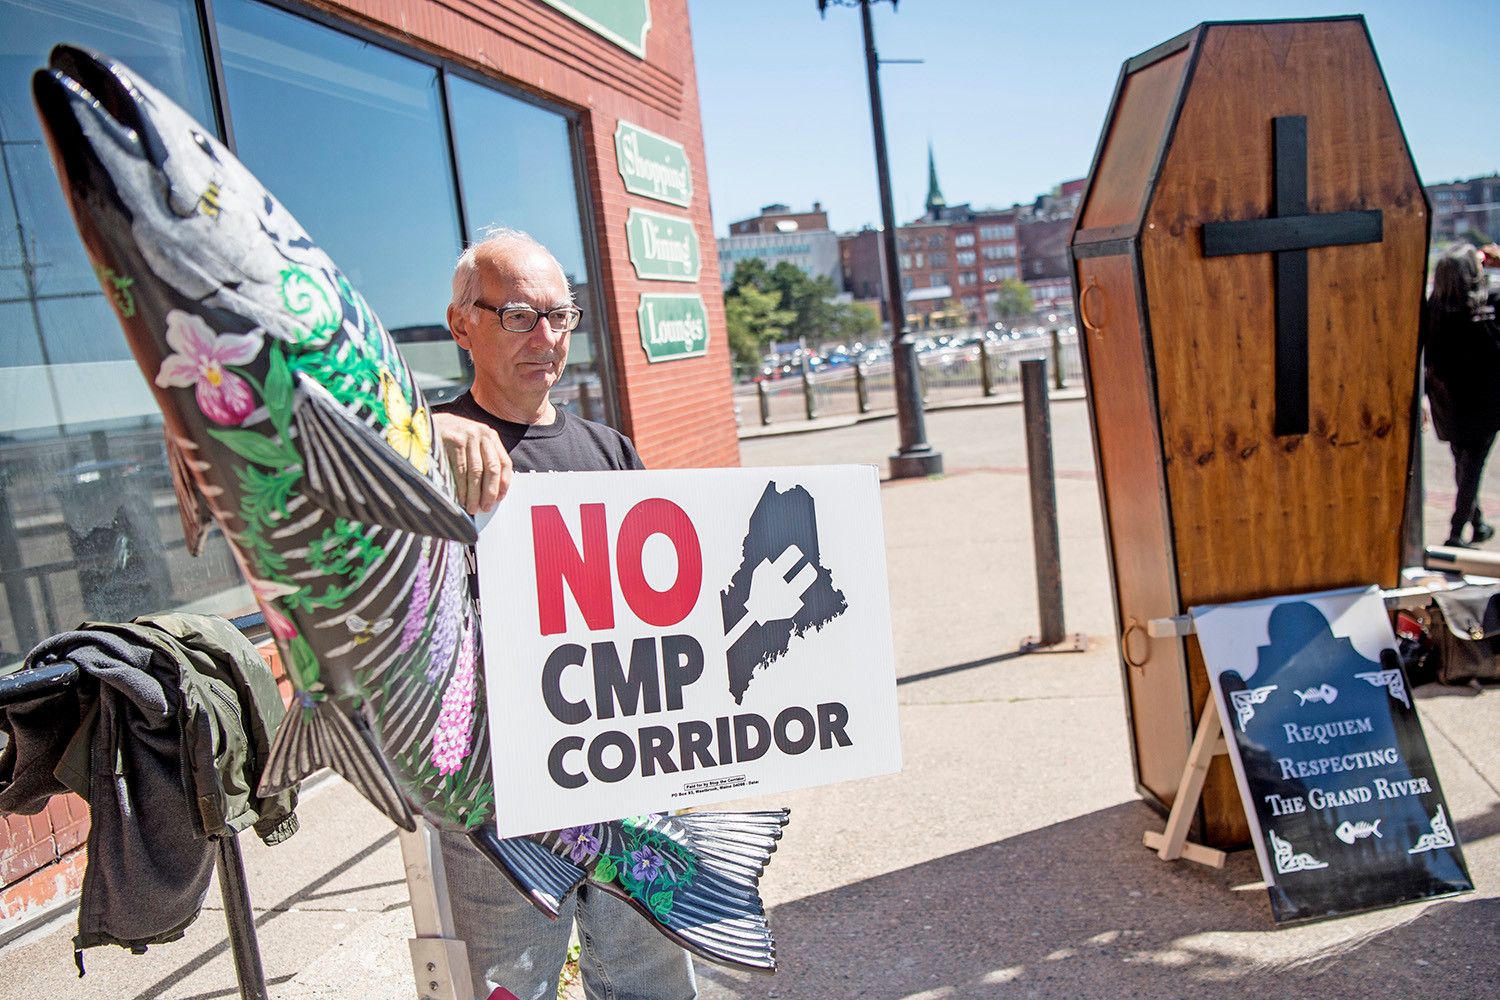 Eldred Davis protests the New England Clean Energy Connect corridor during a demonstration in Saint John, New Brunswick, Canada, on Sept. 9, 2019. Image by Michael G. Seamans. Canada, 2019.